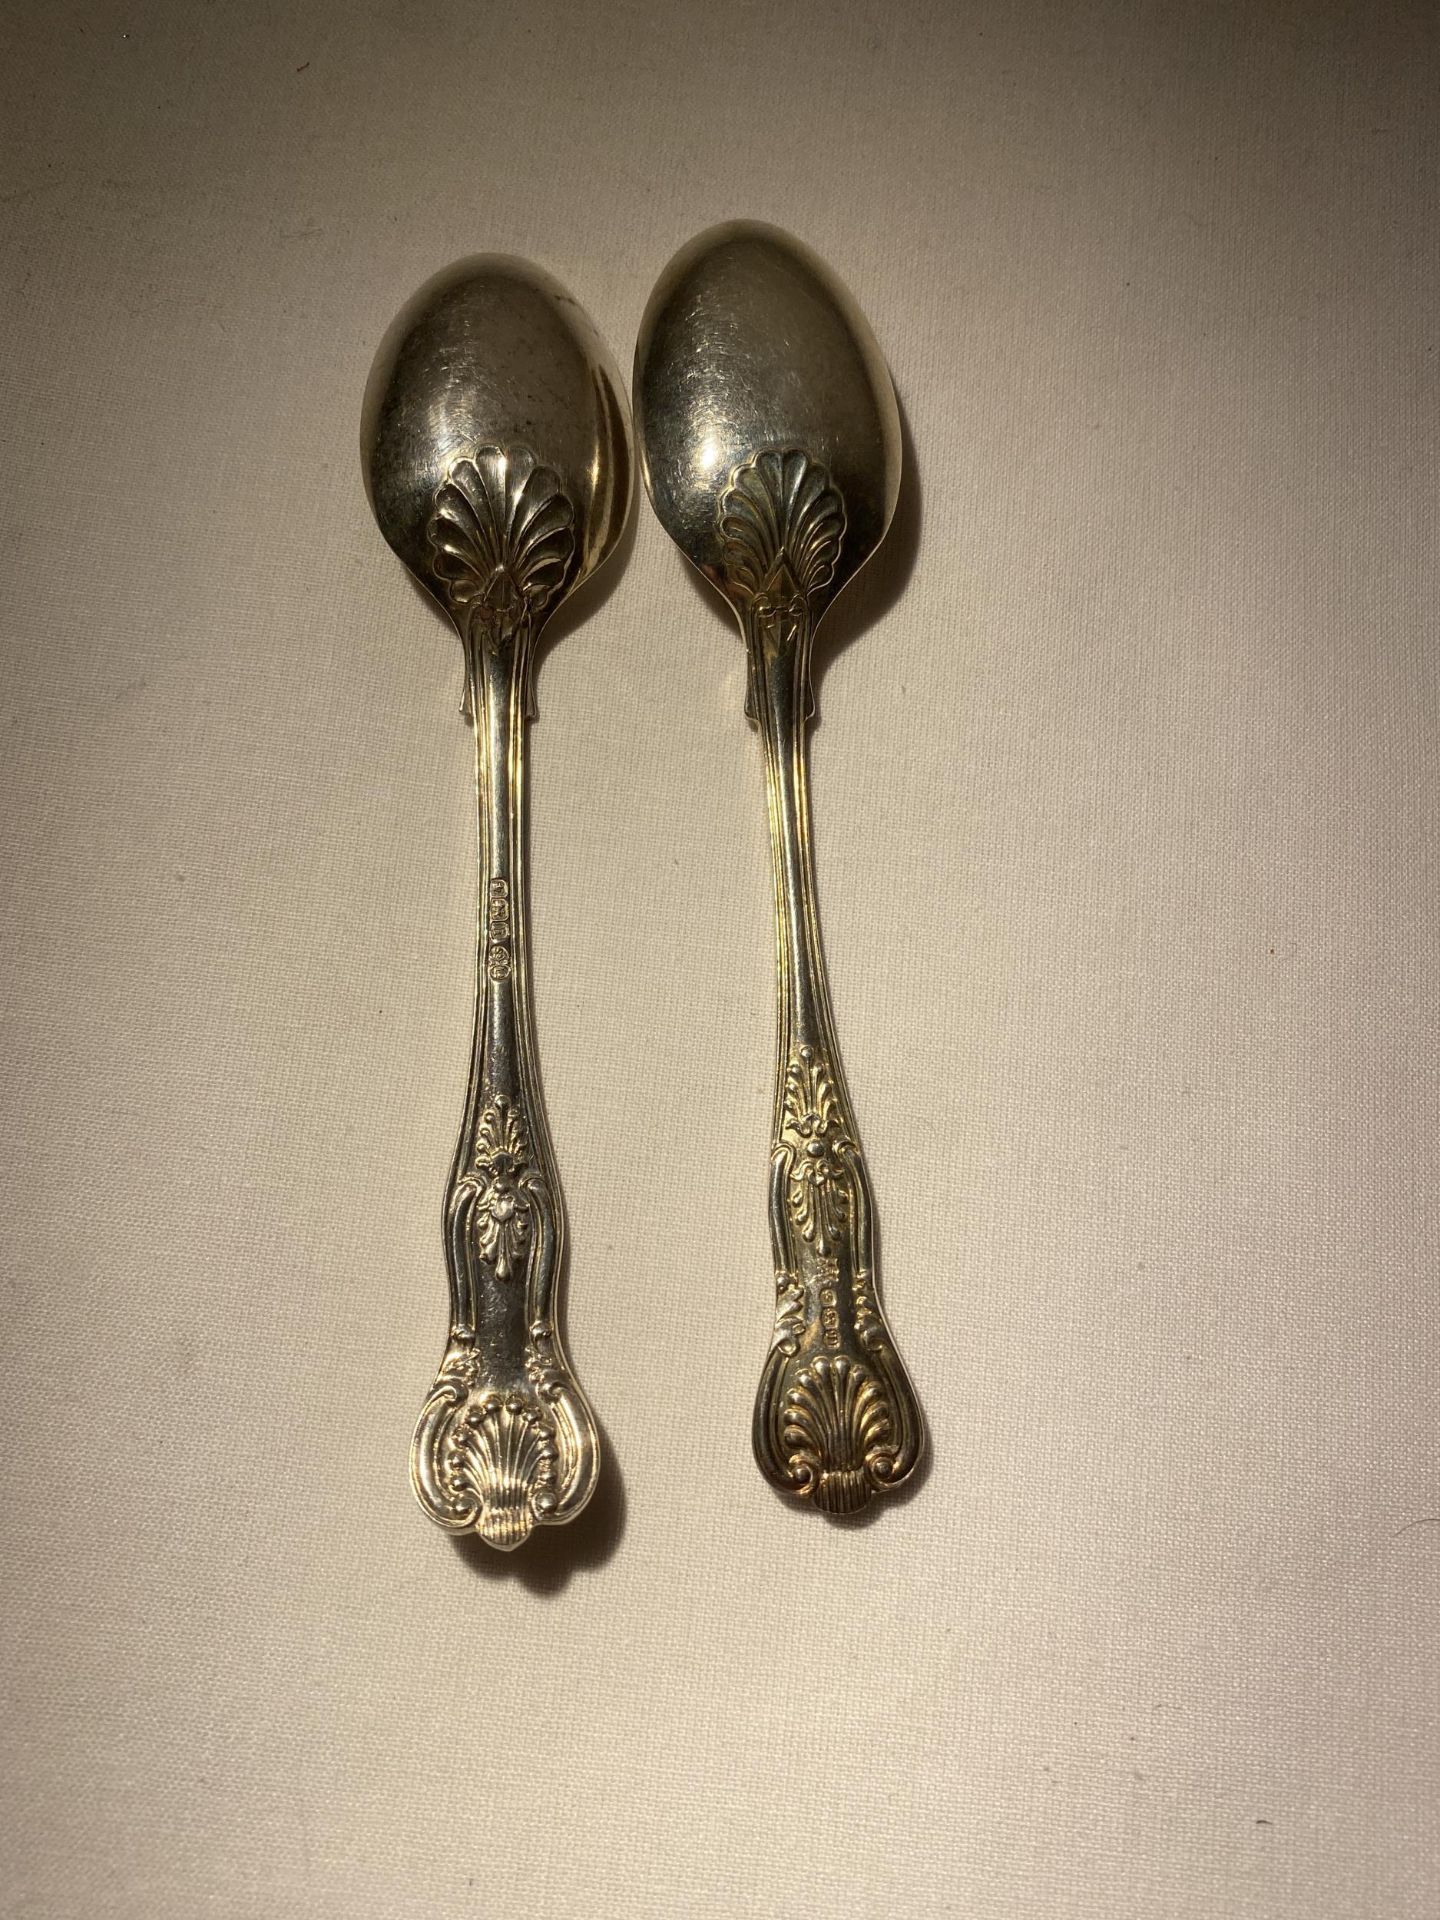 TWO SHEFFIELD HALLMARKED SILVER SPOONS, EARLIEST BEING 1925, MAKER WILLIAM HUTTON & SONS LTD, - Image 12 of 18